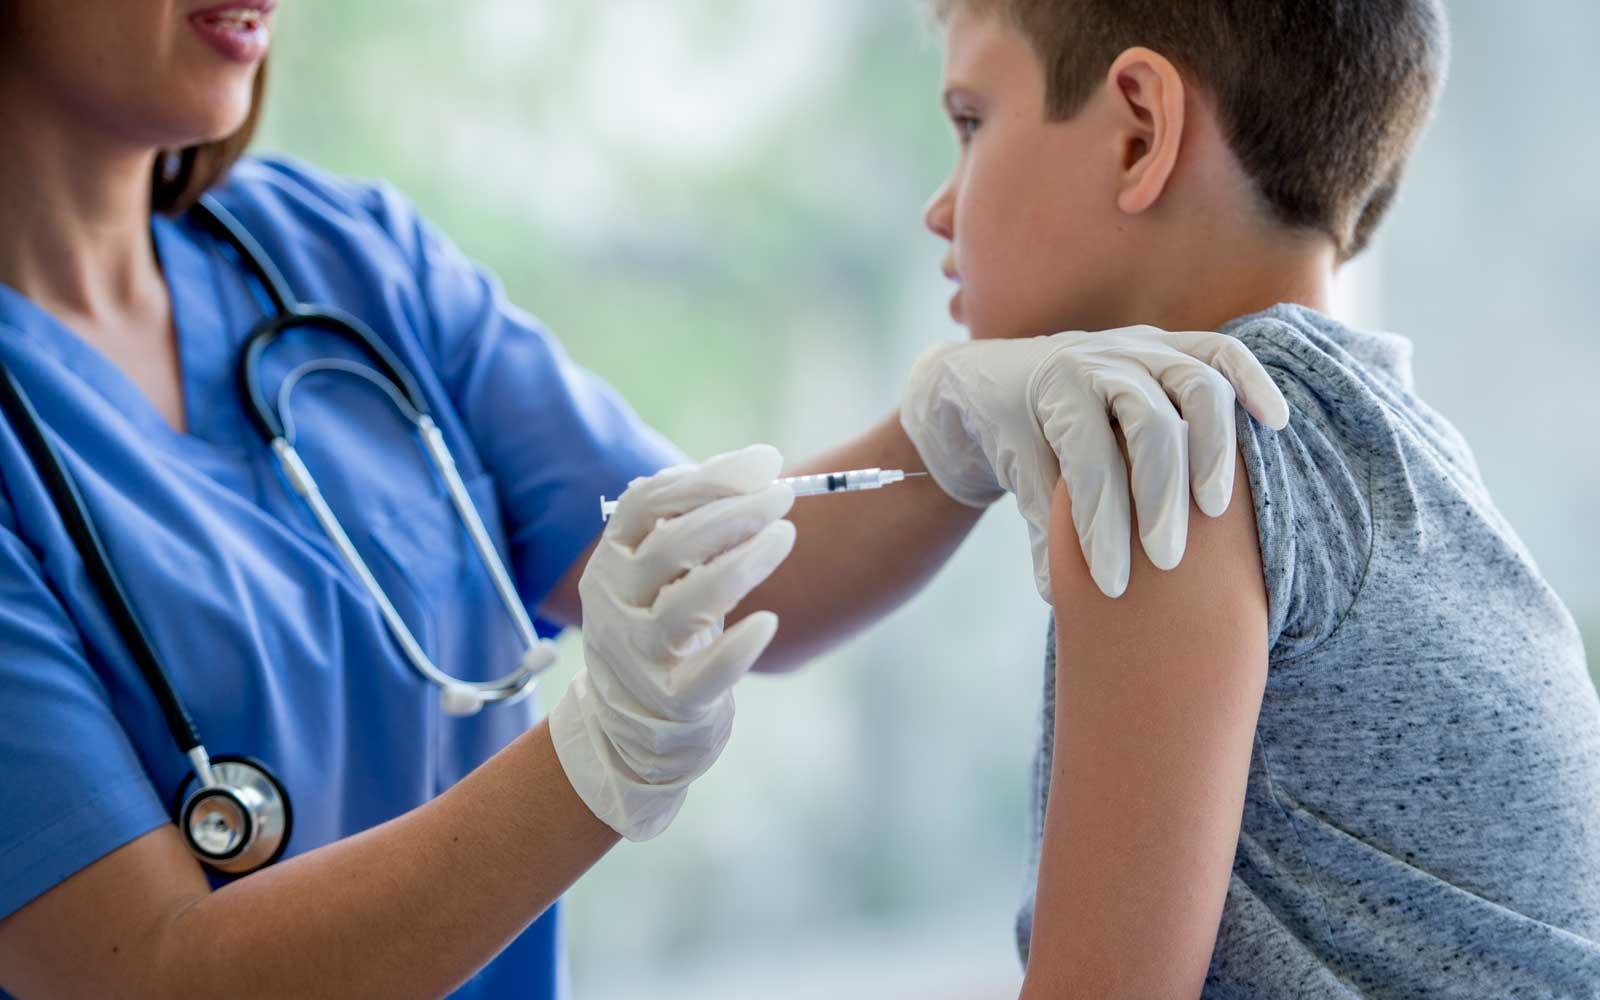 A Guide to Getting the Hepatitis A Vaccine